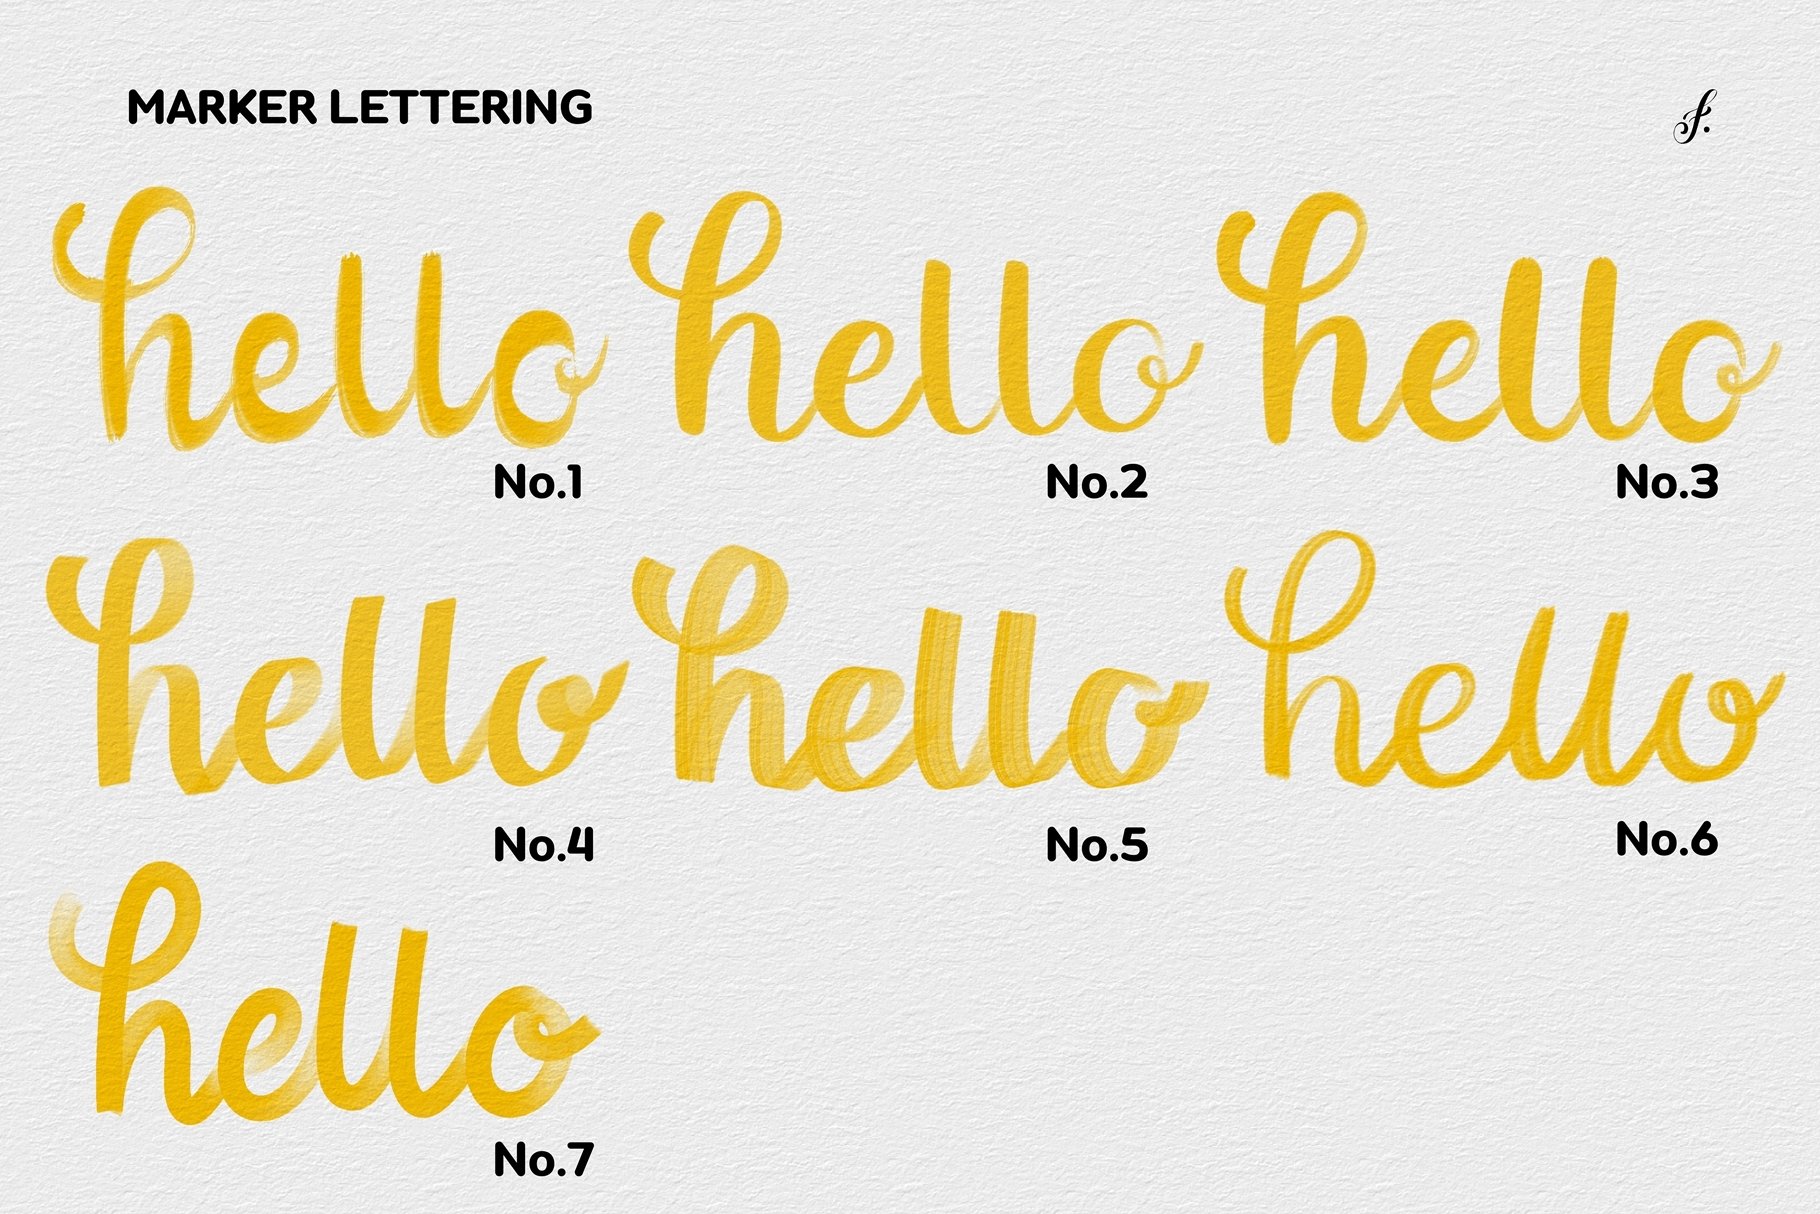 30 Calligraphy & Lettering Guides For Procreate & Print - Design Cuts